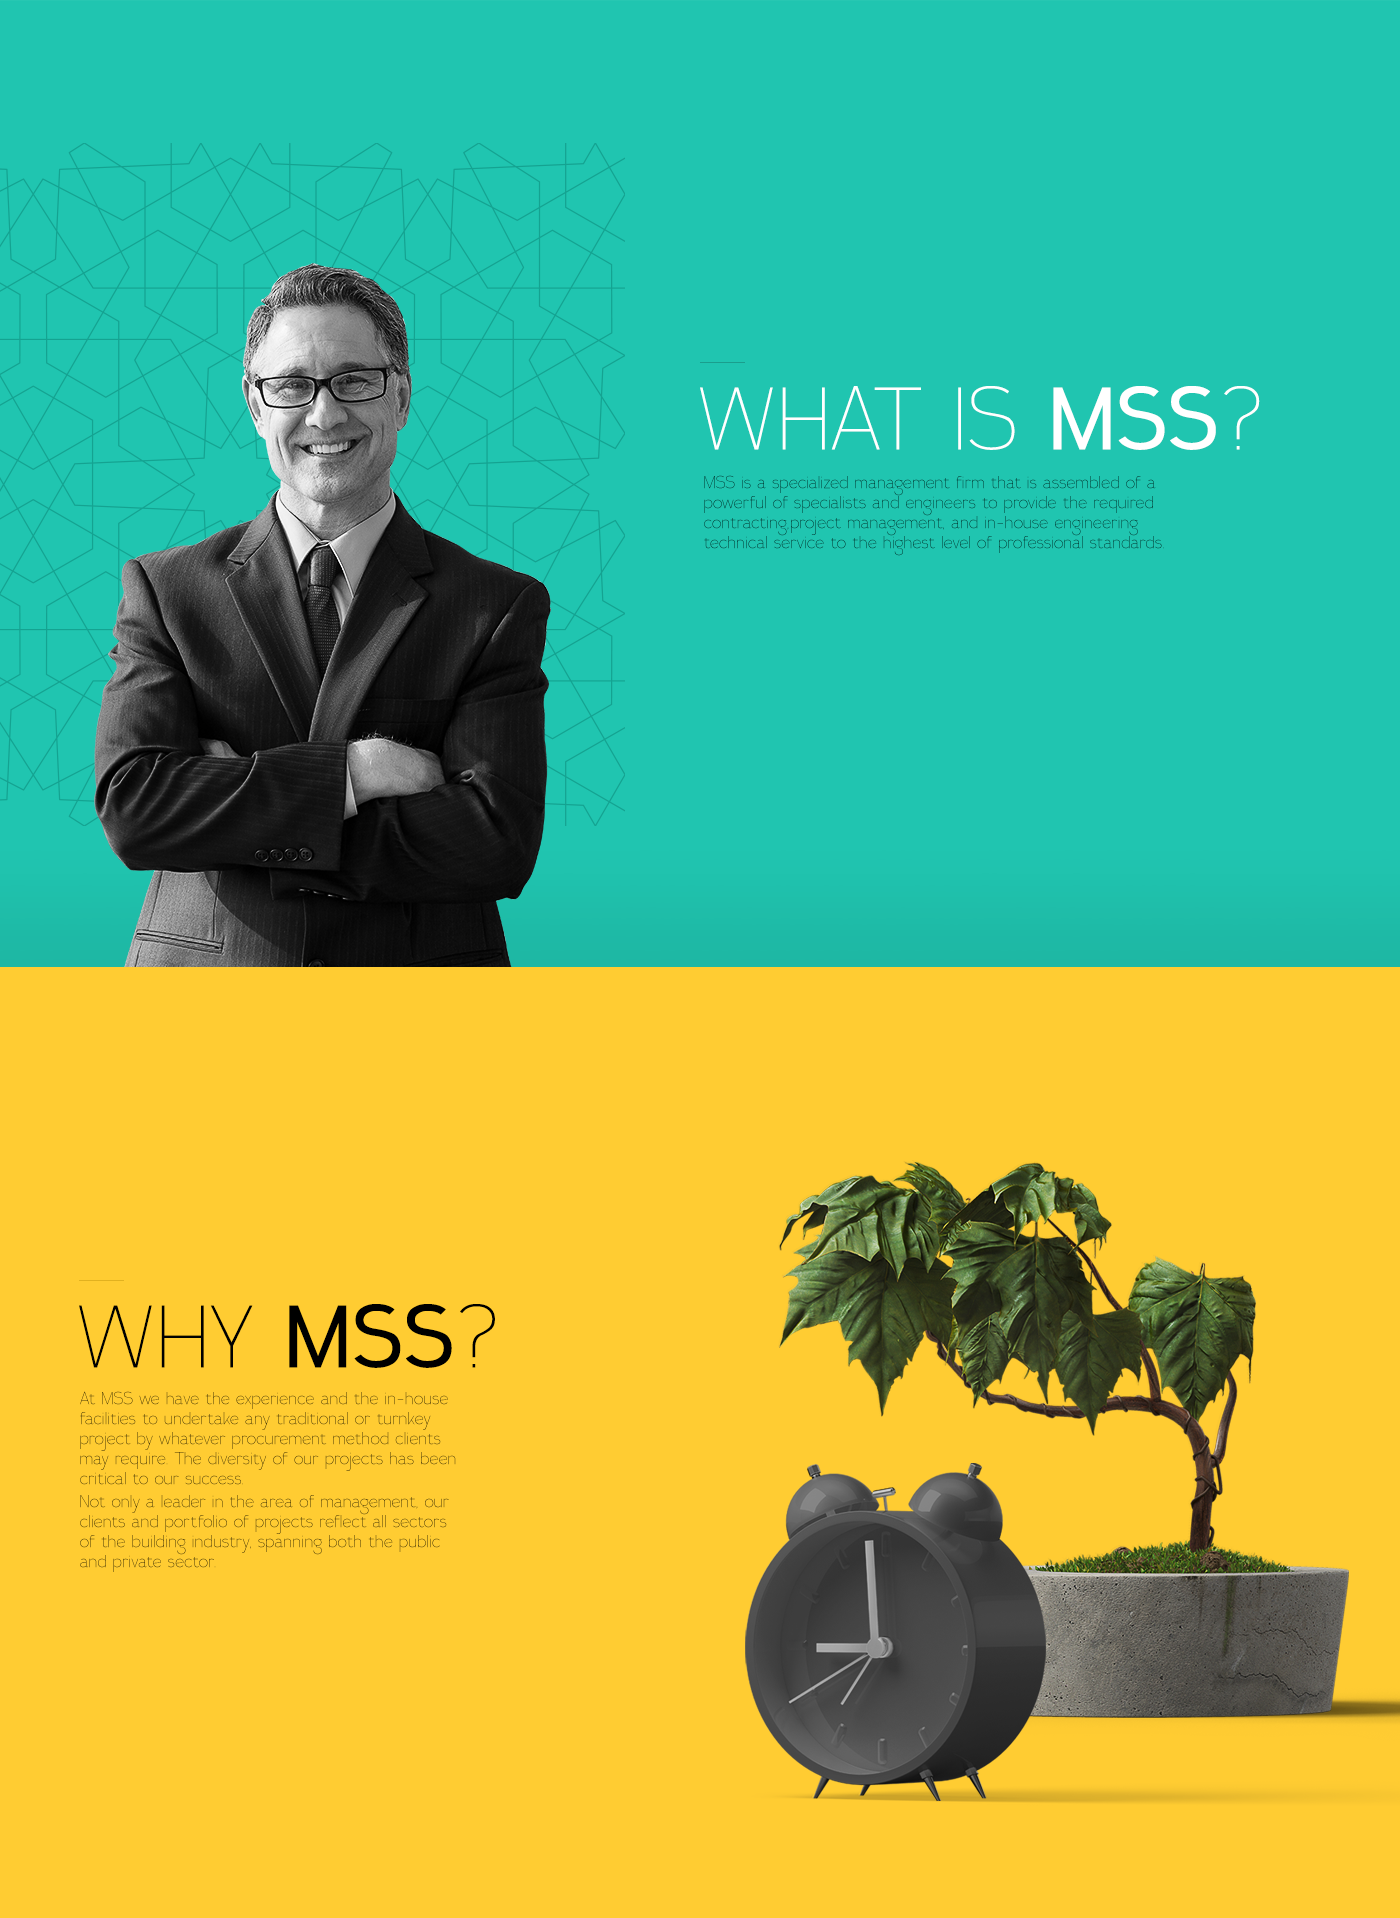 mss MSS is a specialized management firm that is assembled of a powerful of specialists and engineers to provide the required contracting Project Management and